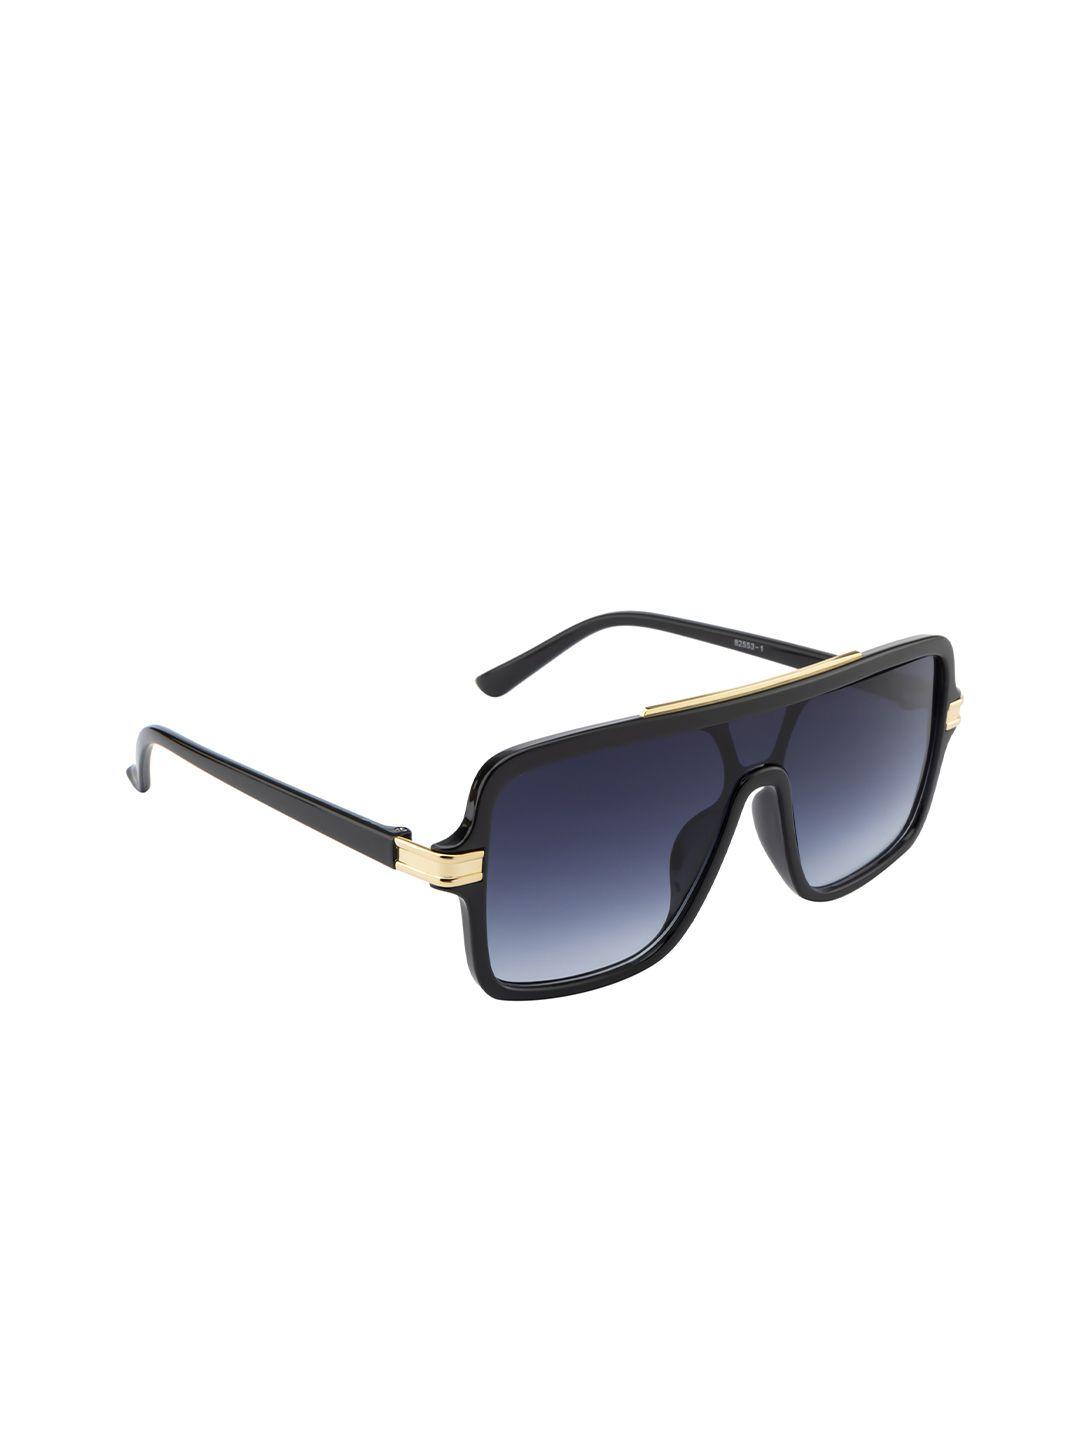 dressberry-women-square-sunglasses-with-uv-protected-lens-m23112